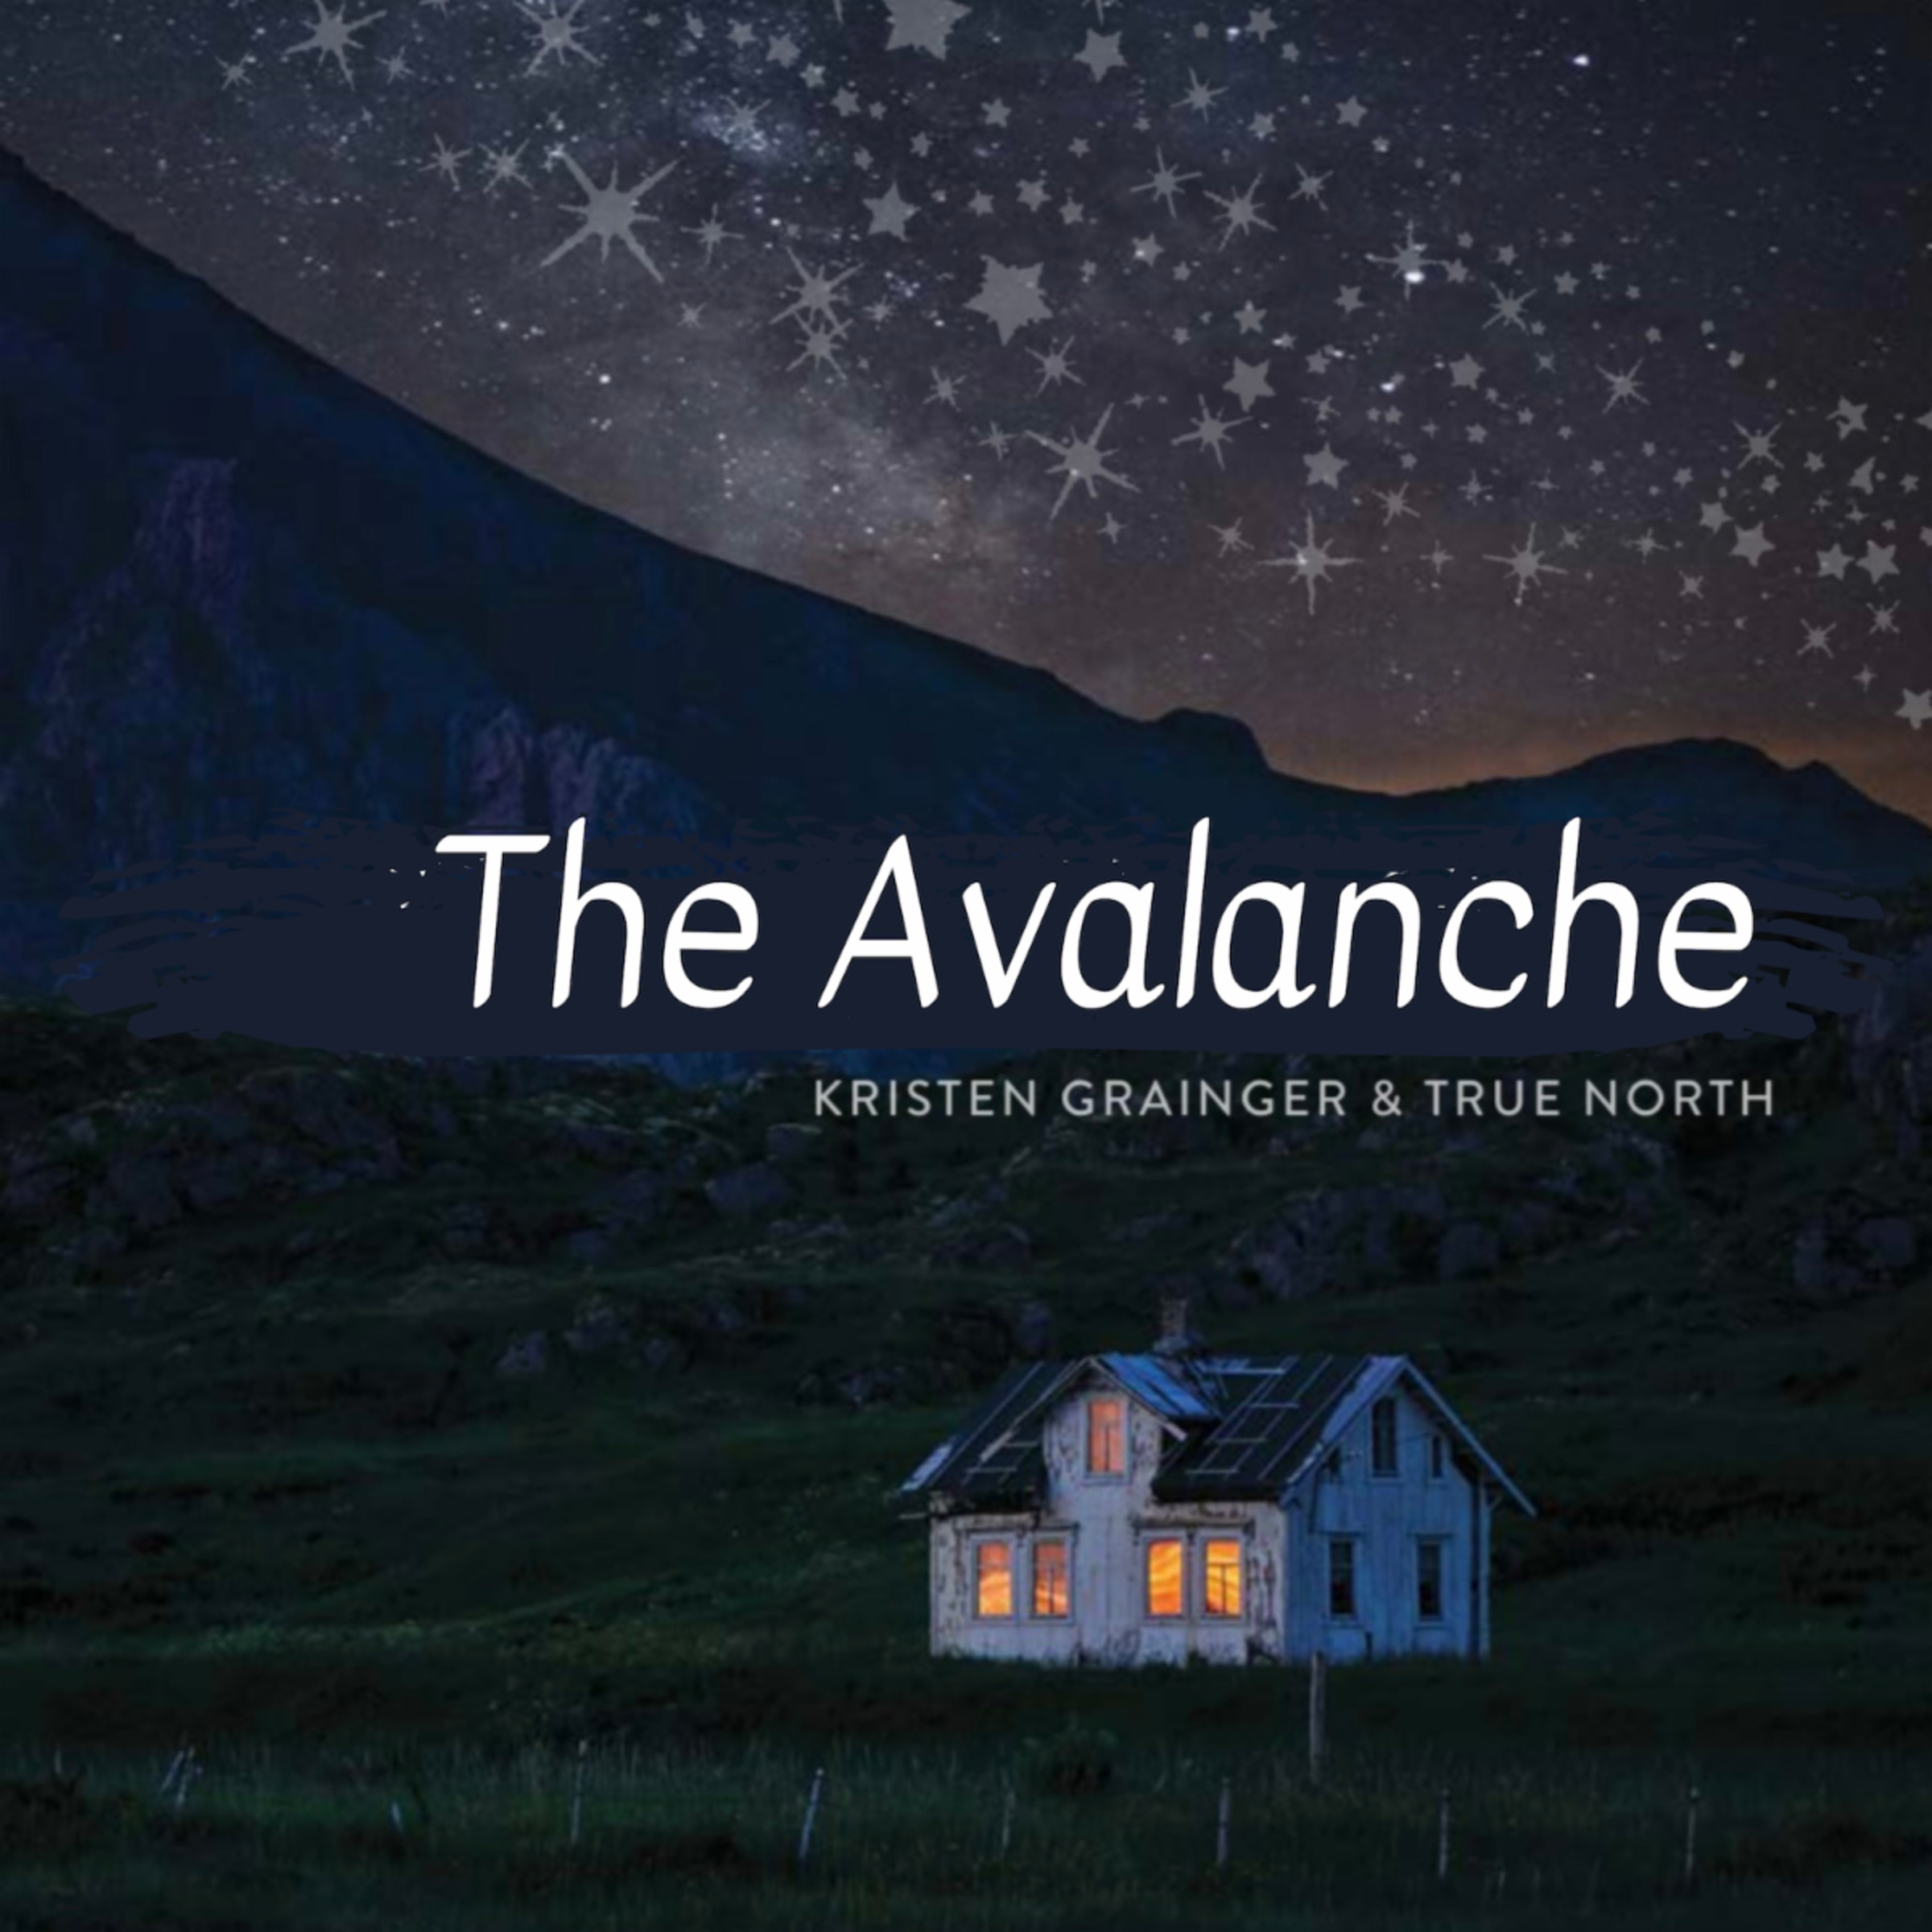 Kristen Grainger & True North Extol the Power of True Love with “The Avalanche”